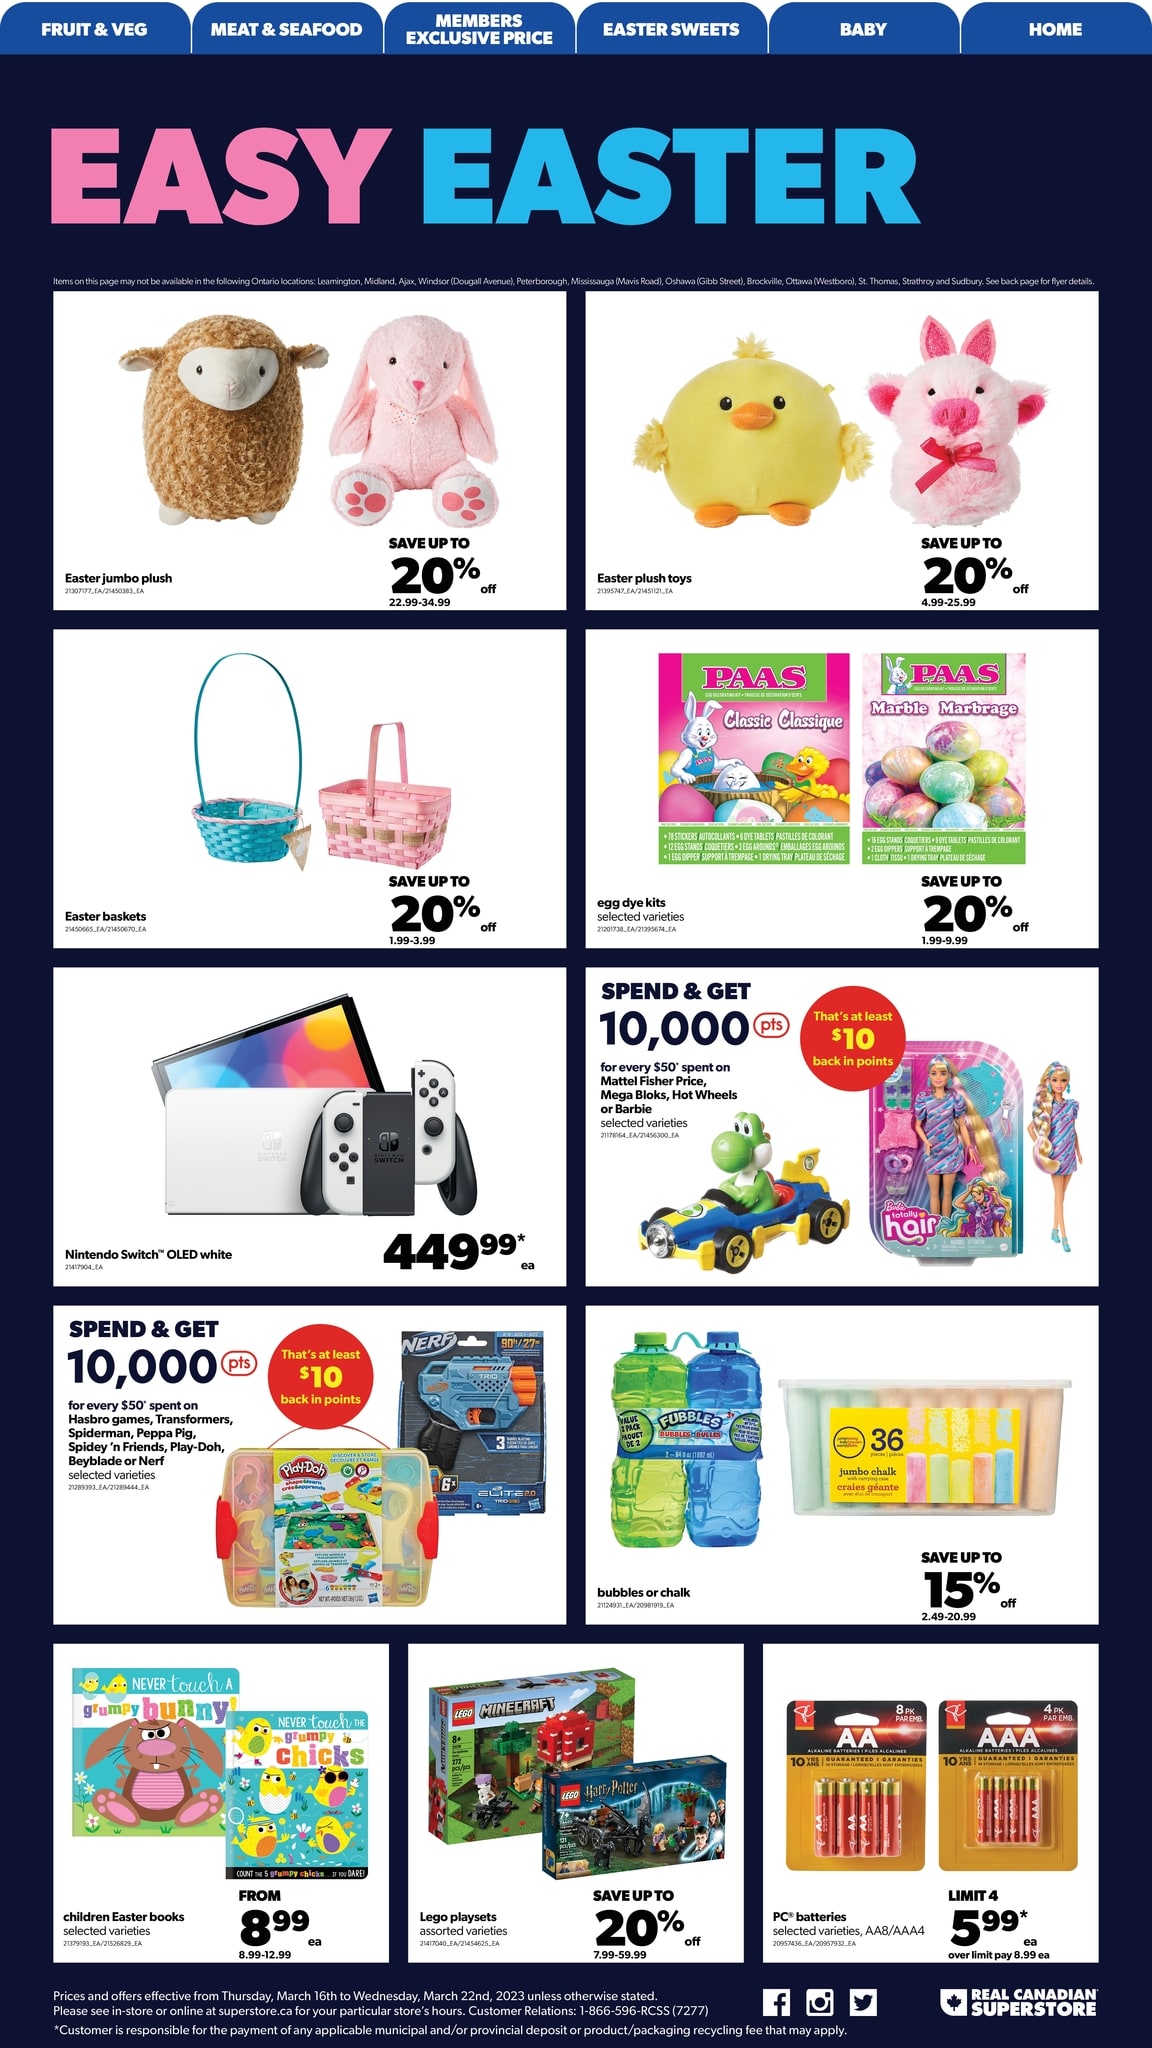 Real Canadian Superstore - Ontario - Weekly Flyer Specials - Page 18